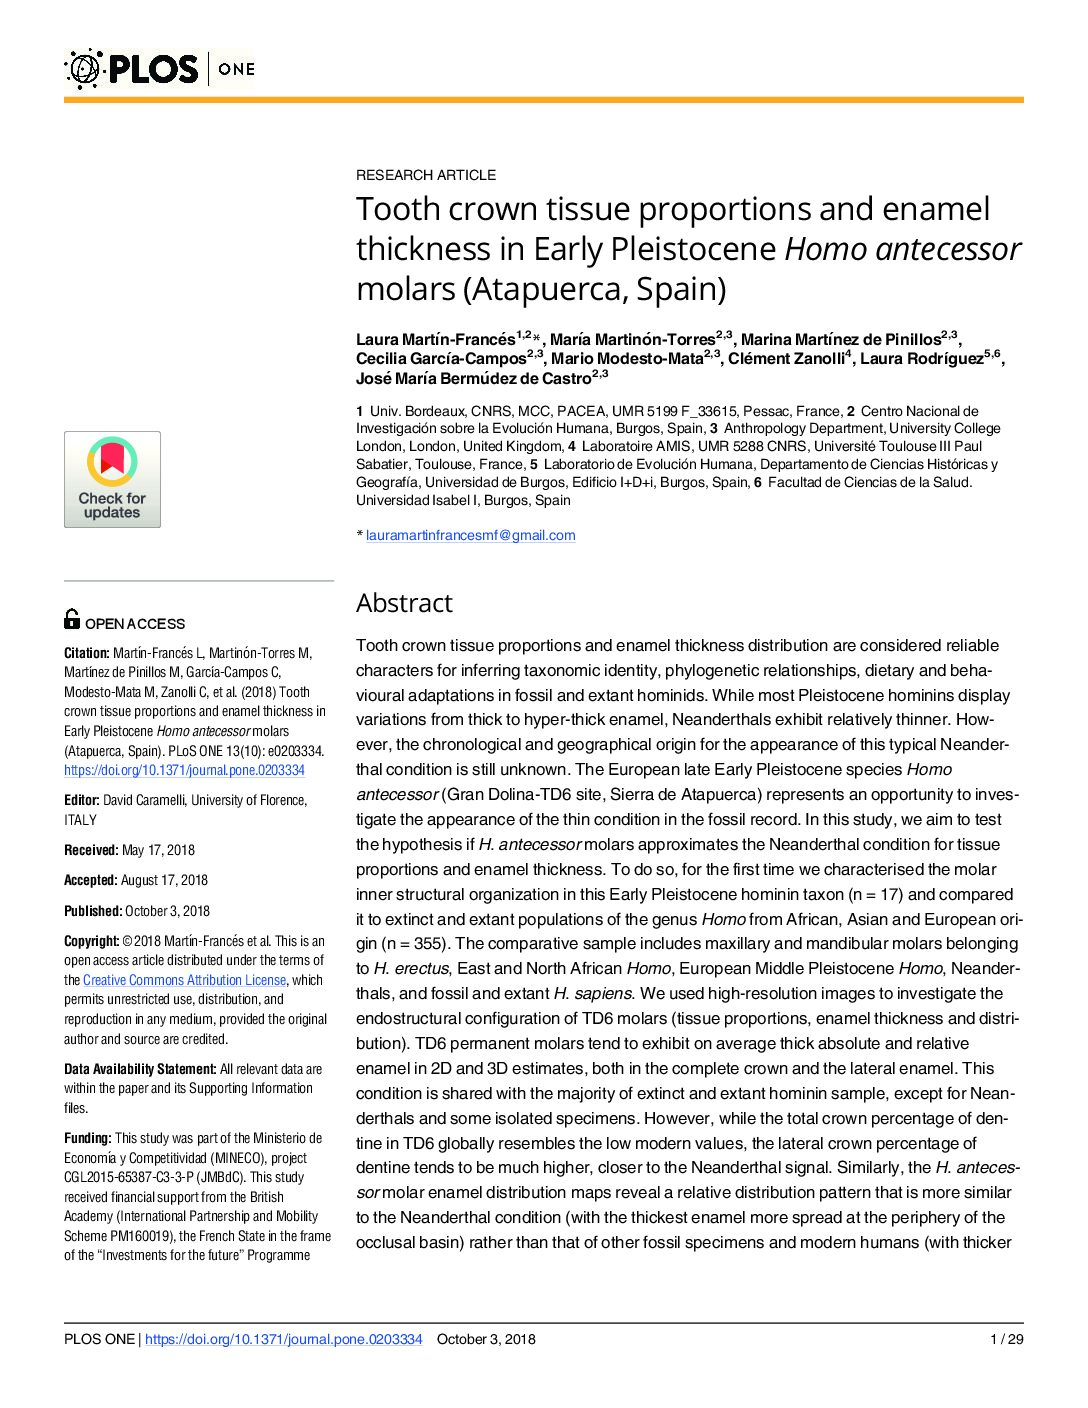 Tooth crown tissue proportions and enamel thickness in Early Pleistocene Homo antecessor molars (Atapuerca, Spain)